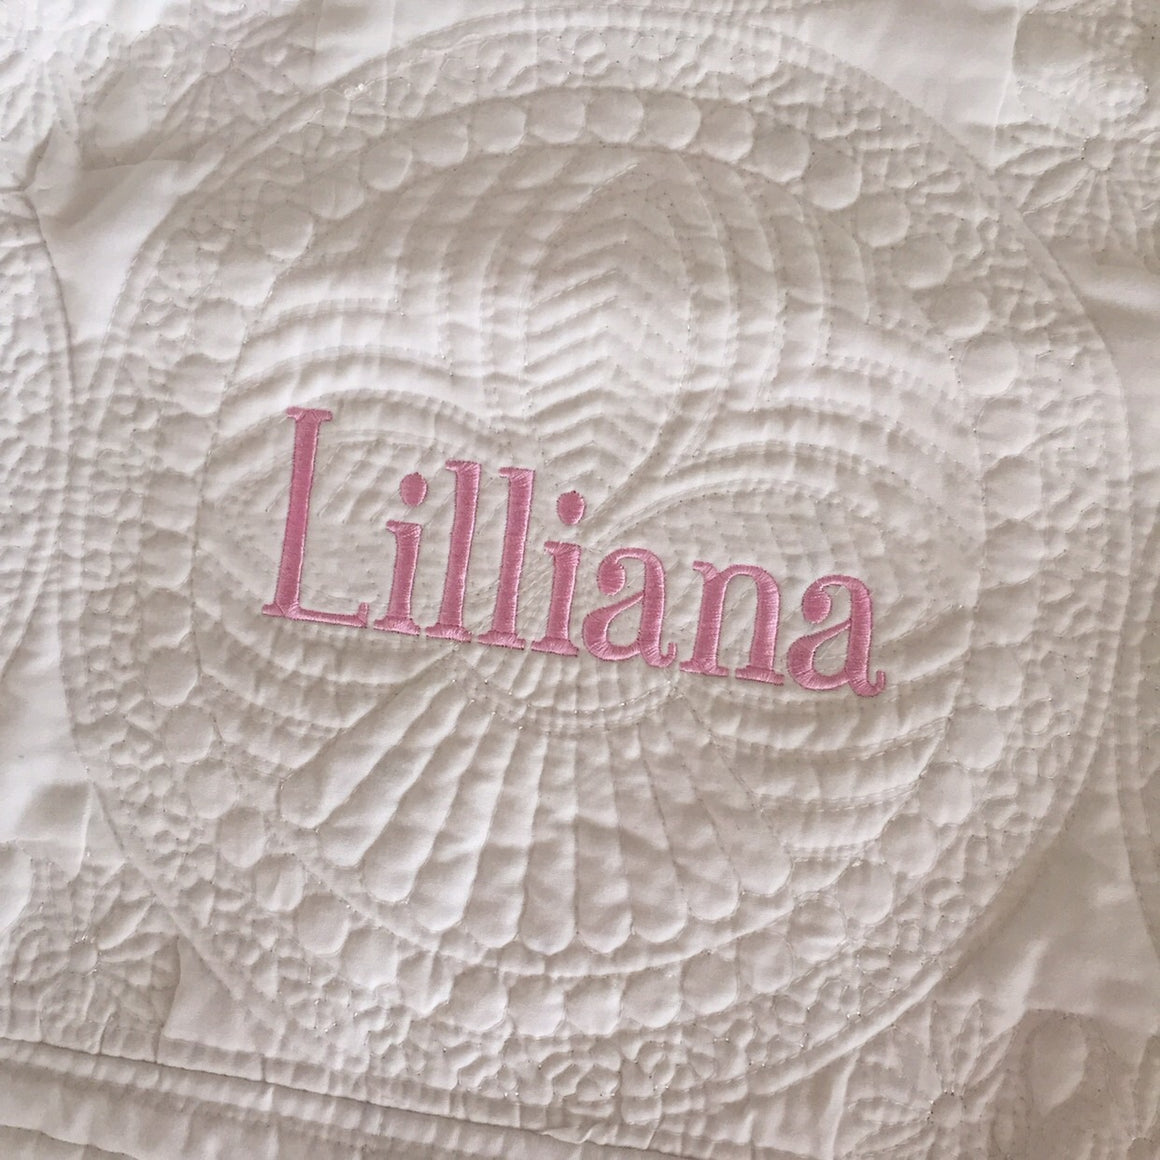 Personalized Baby Quilt / Blanket (Name or Monogram only)